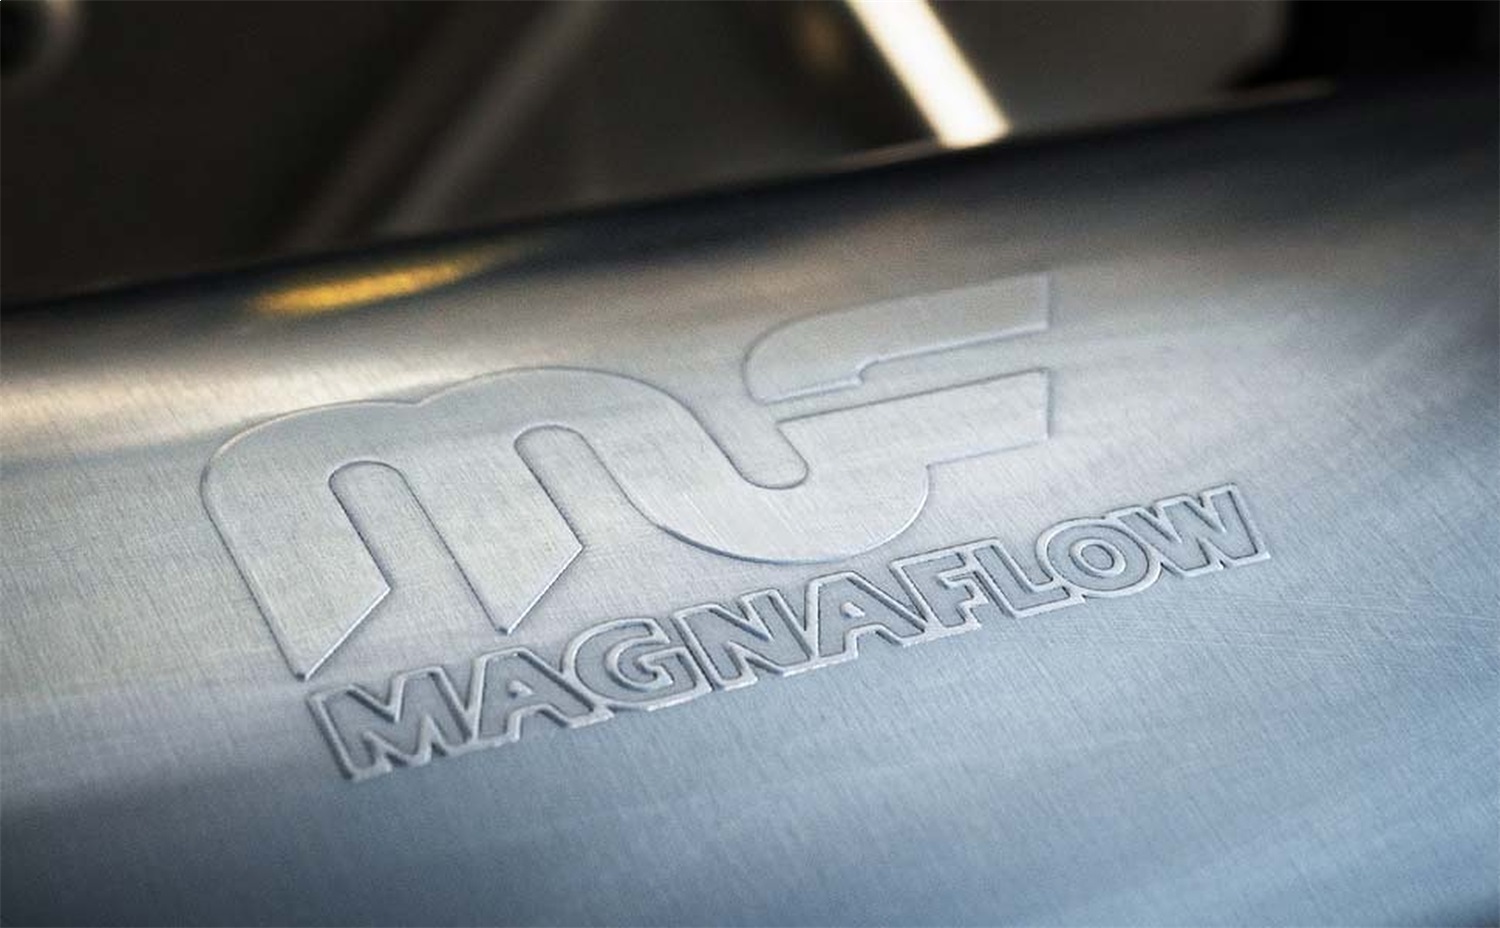 MagnaFlow Exhaust Products Magnaflow Performance Exhaust 11386 Stainless Steel Muffler